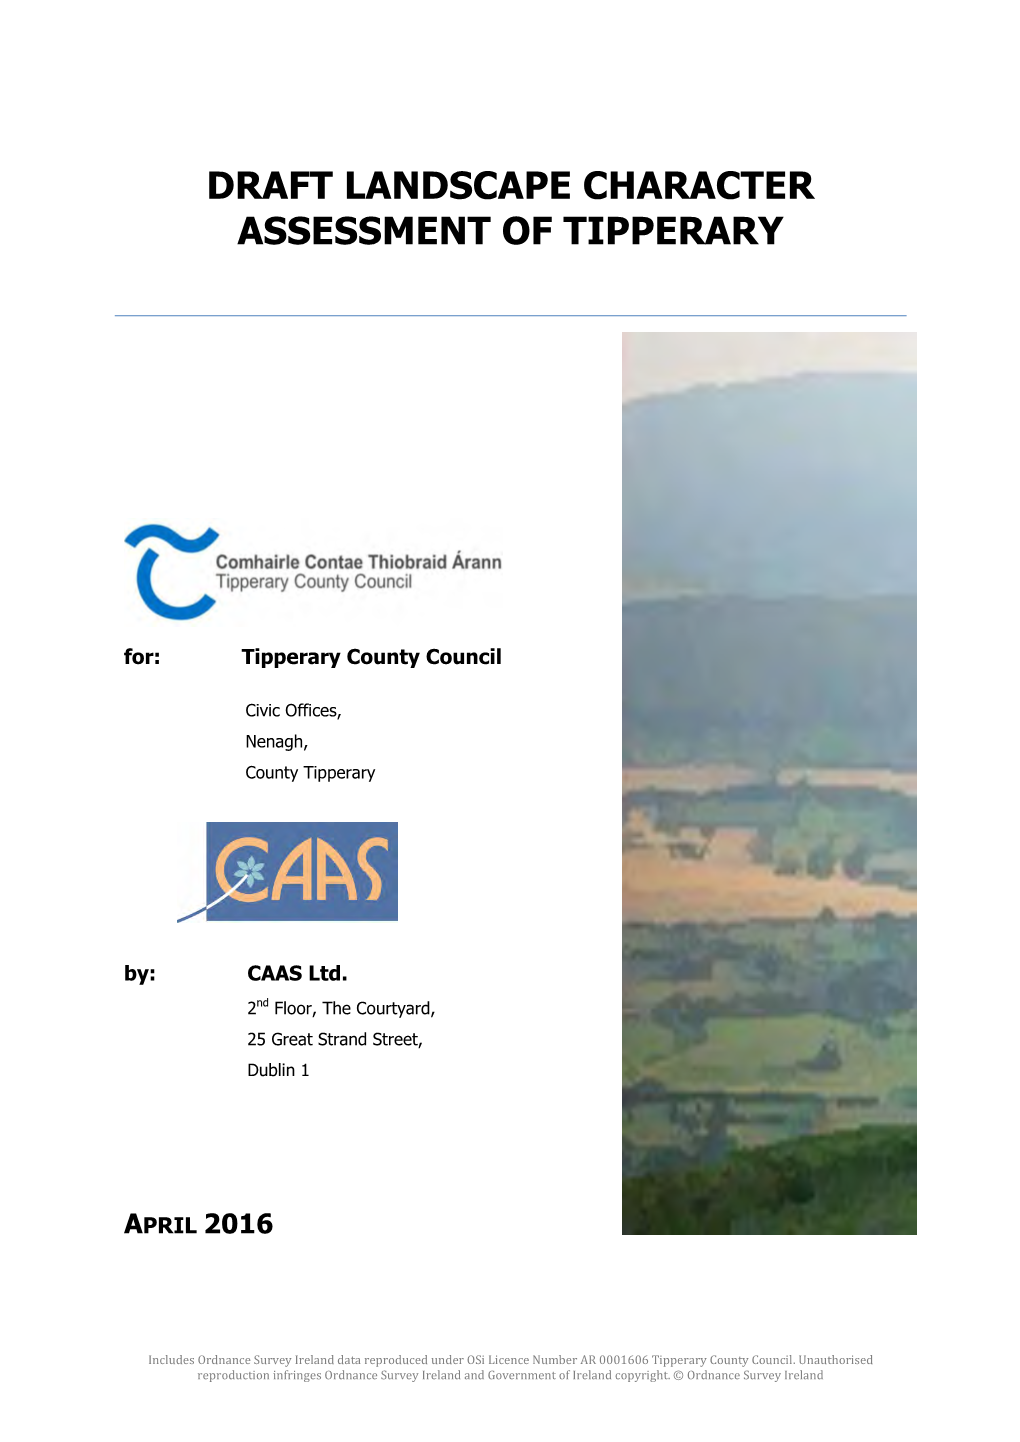 Draft Landscape Character Assessment of Tipperary